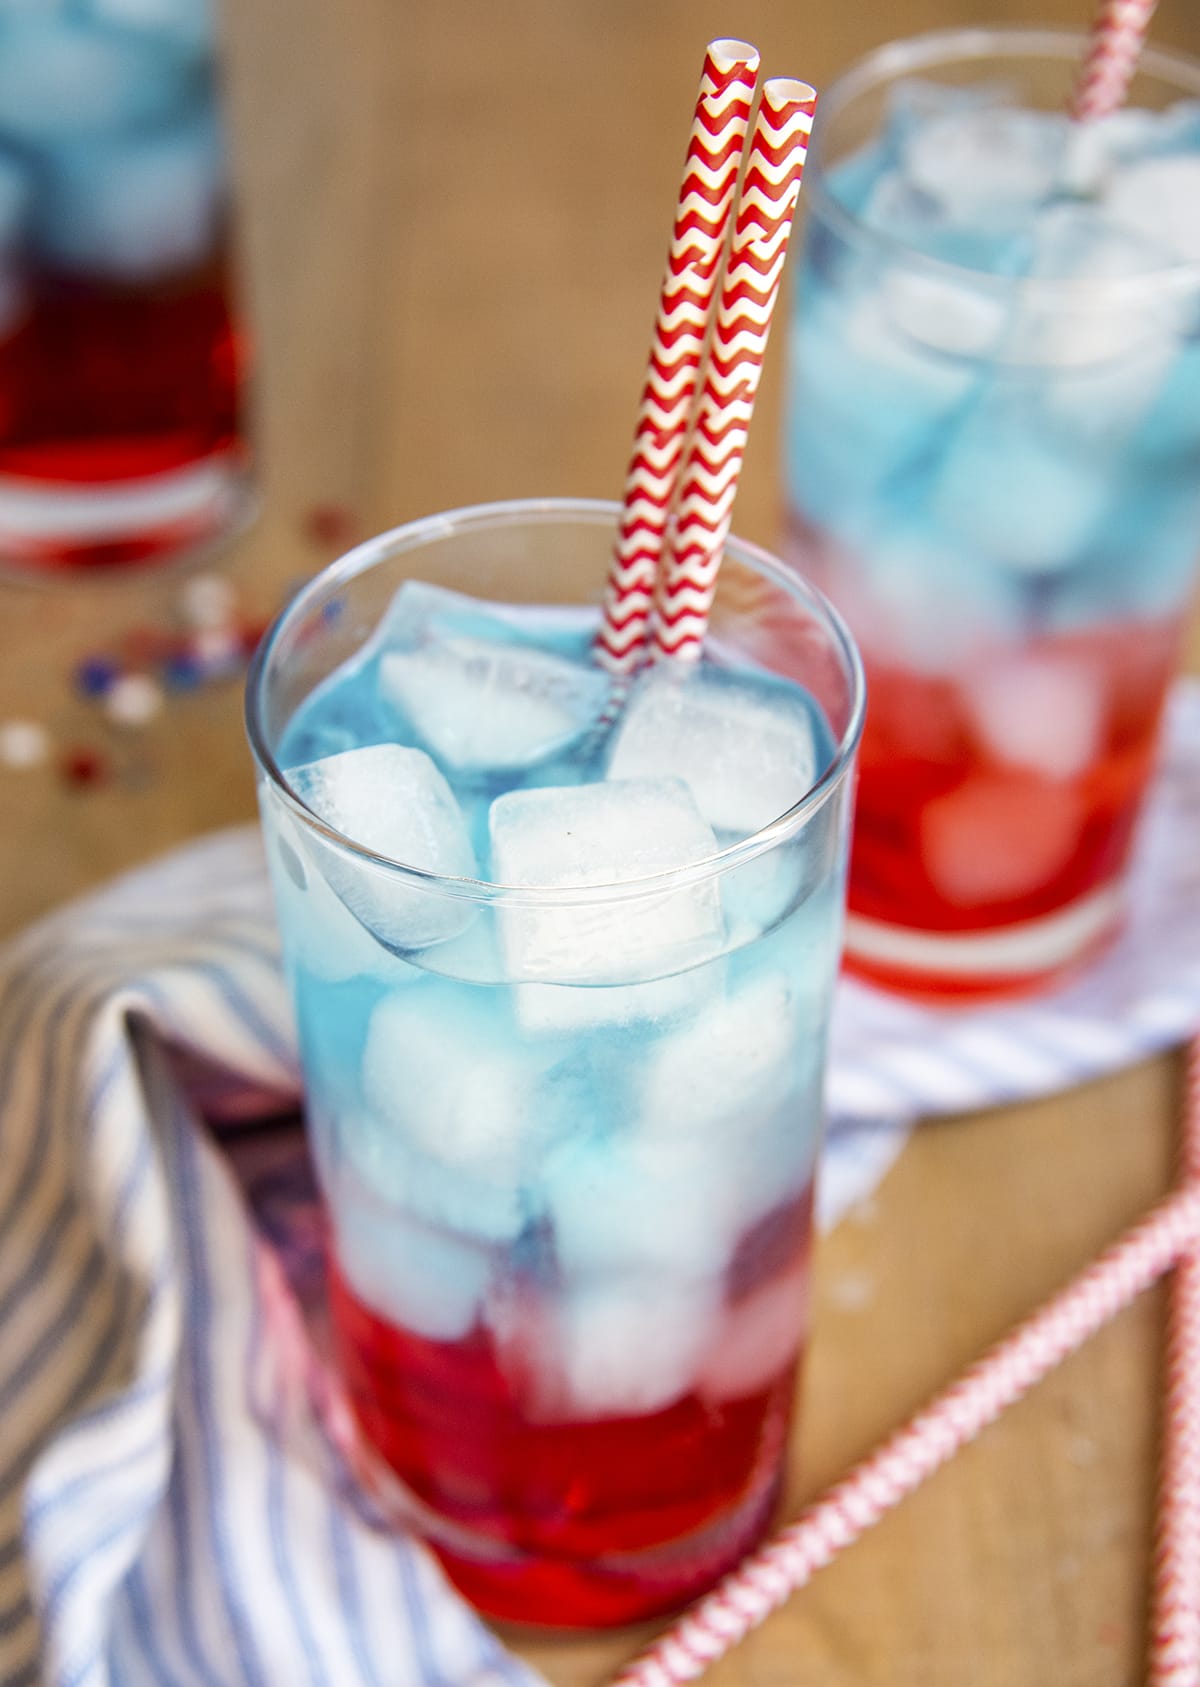 A glass of a red, white, and blue layered drink with two paper straws.